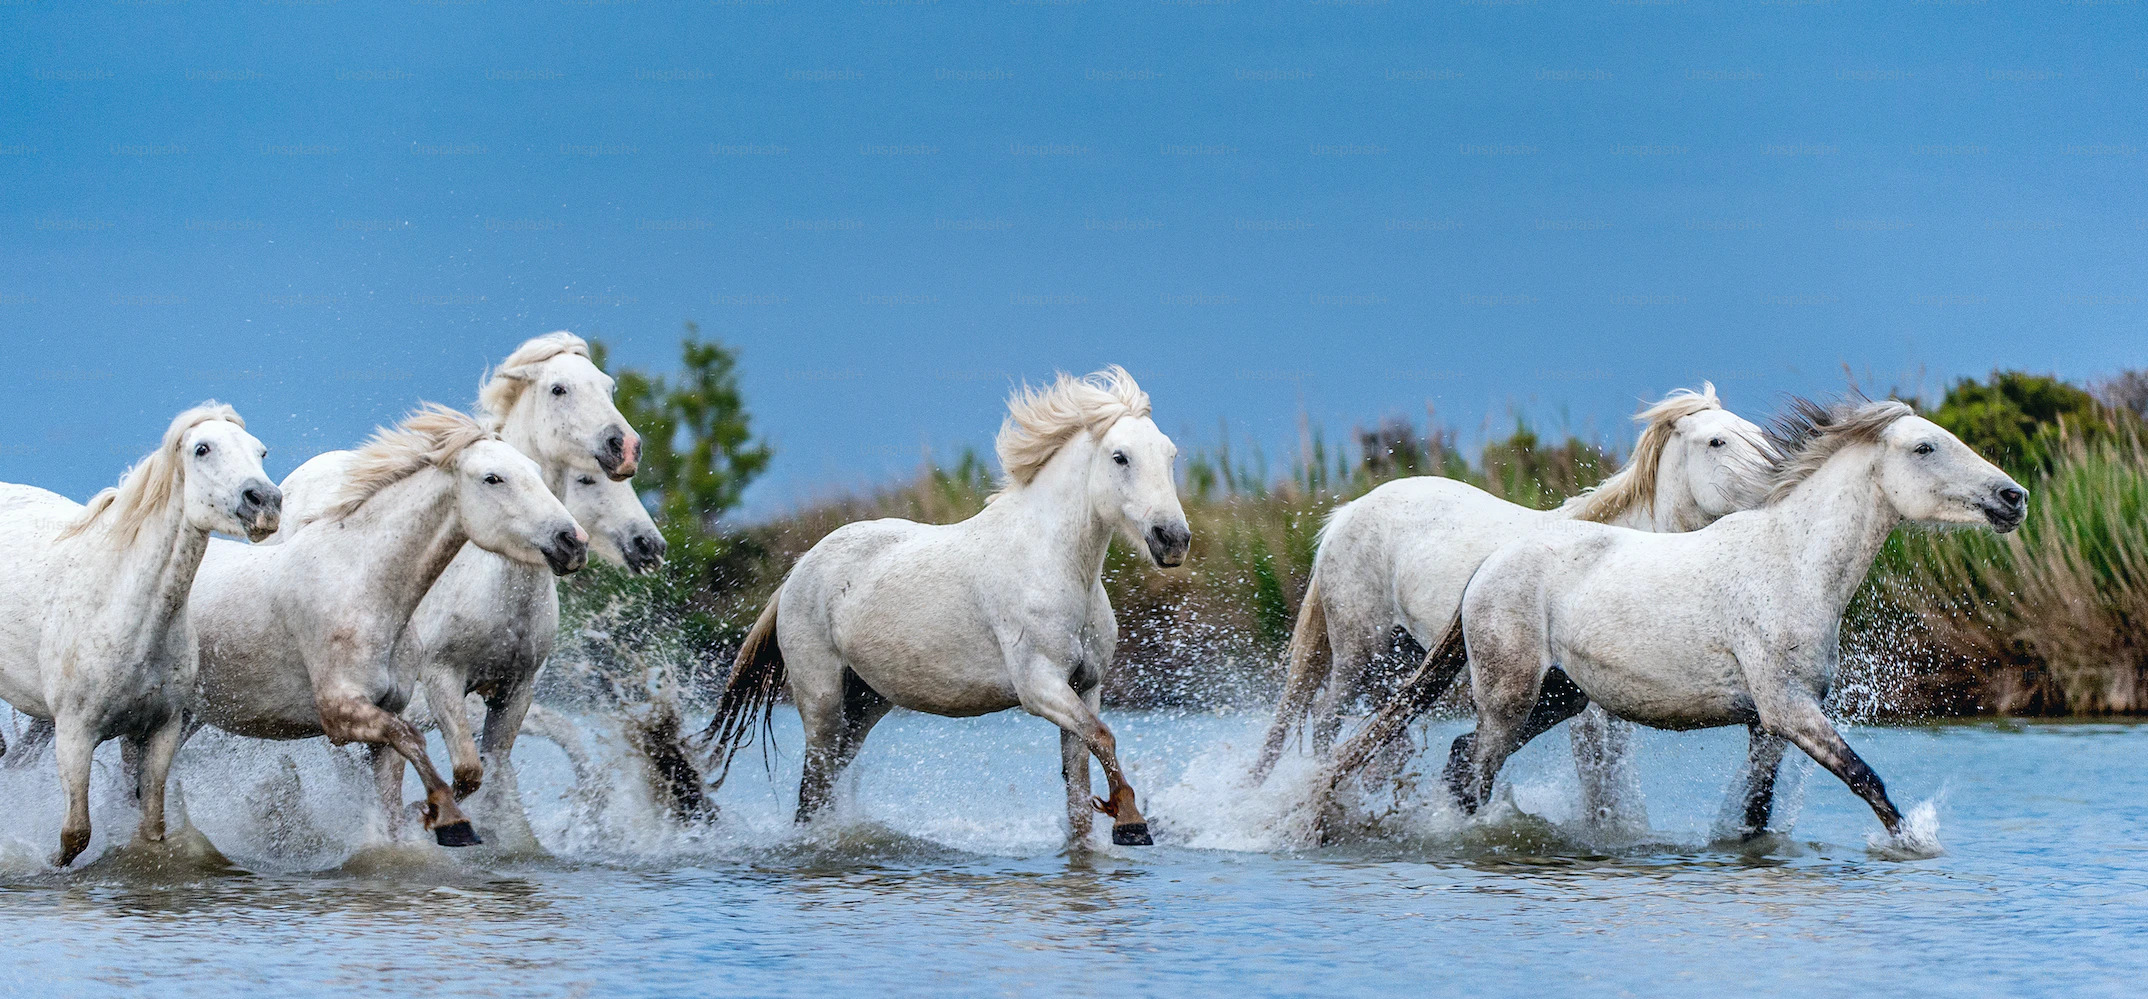 Horses galloping on the water